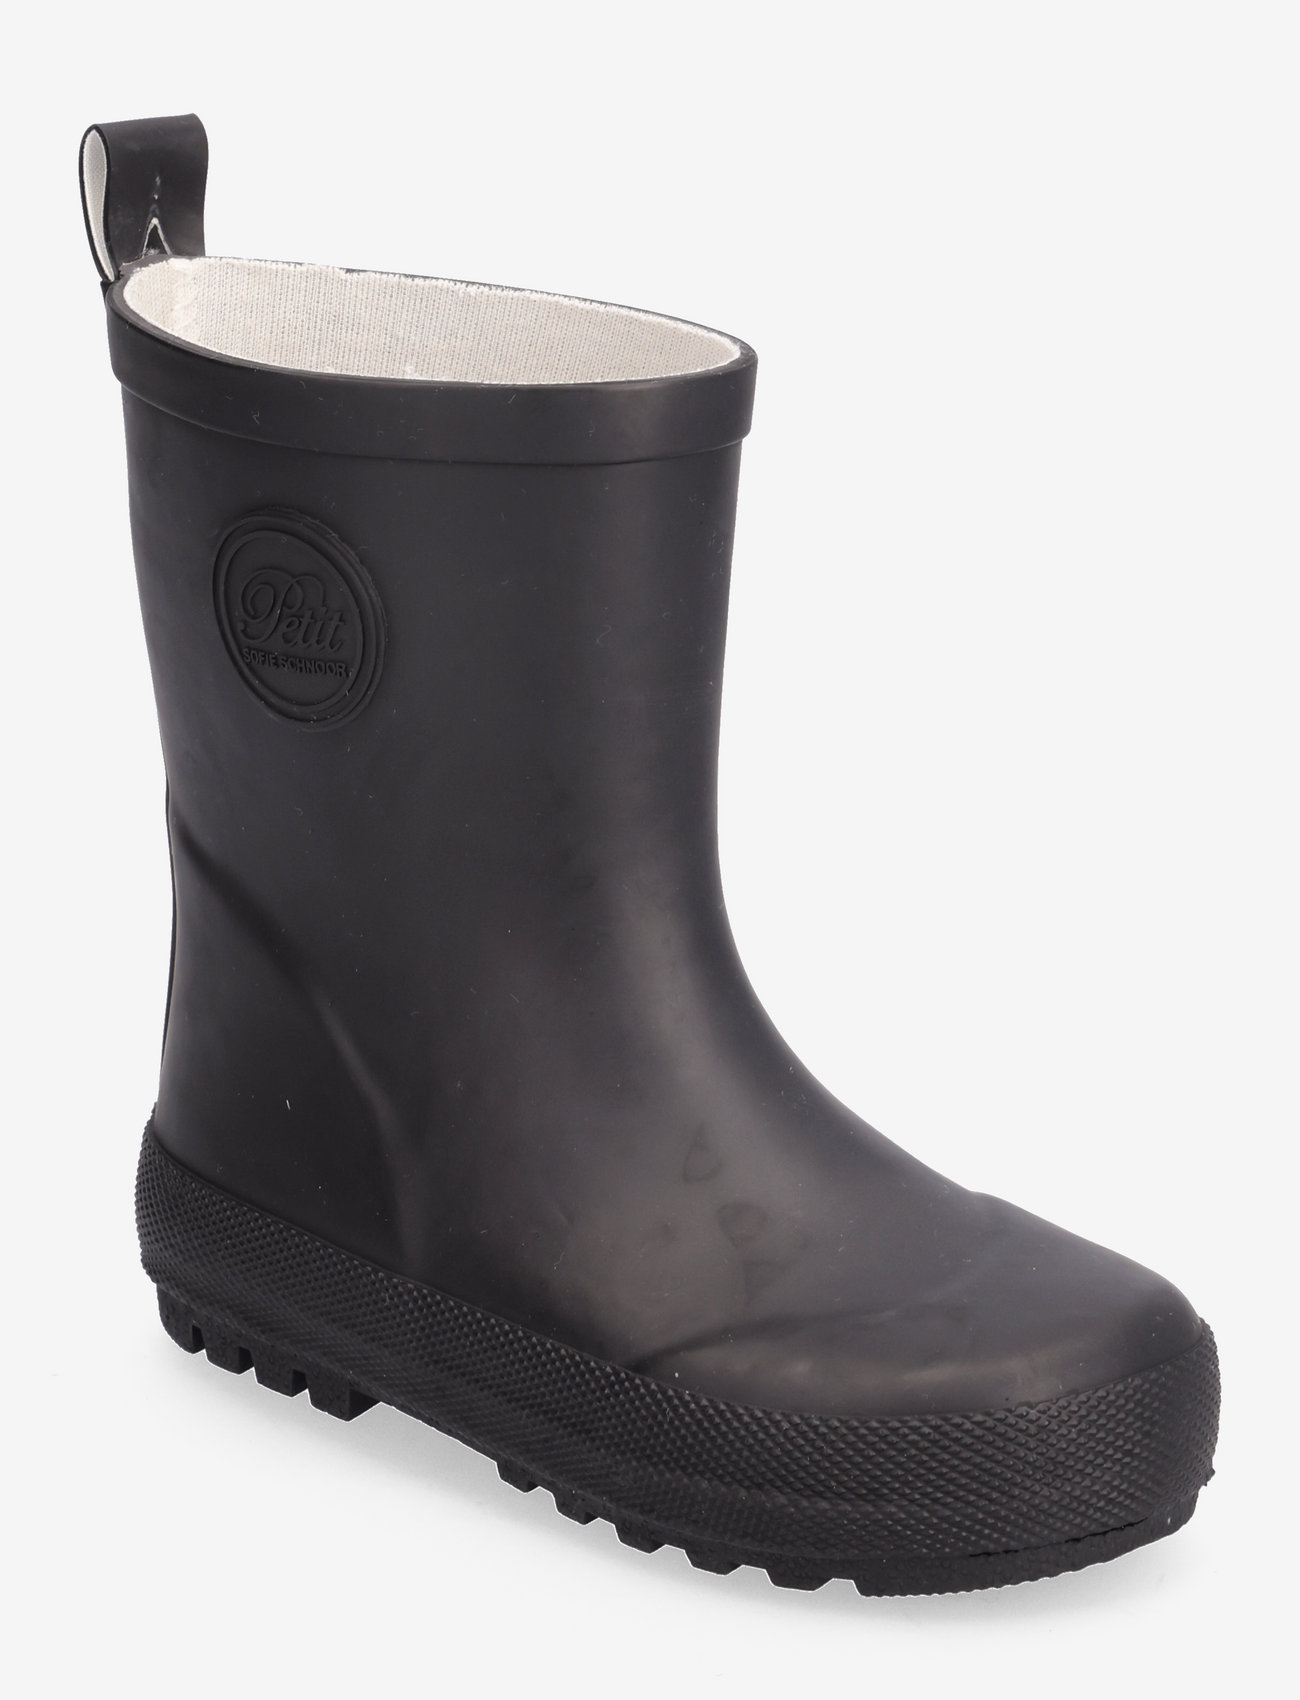 Sofie Schnoor Baby and Kids - Rubber boot - unlined rubberboots - black - 0